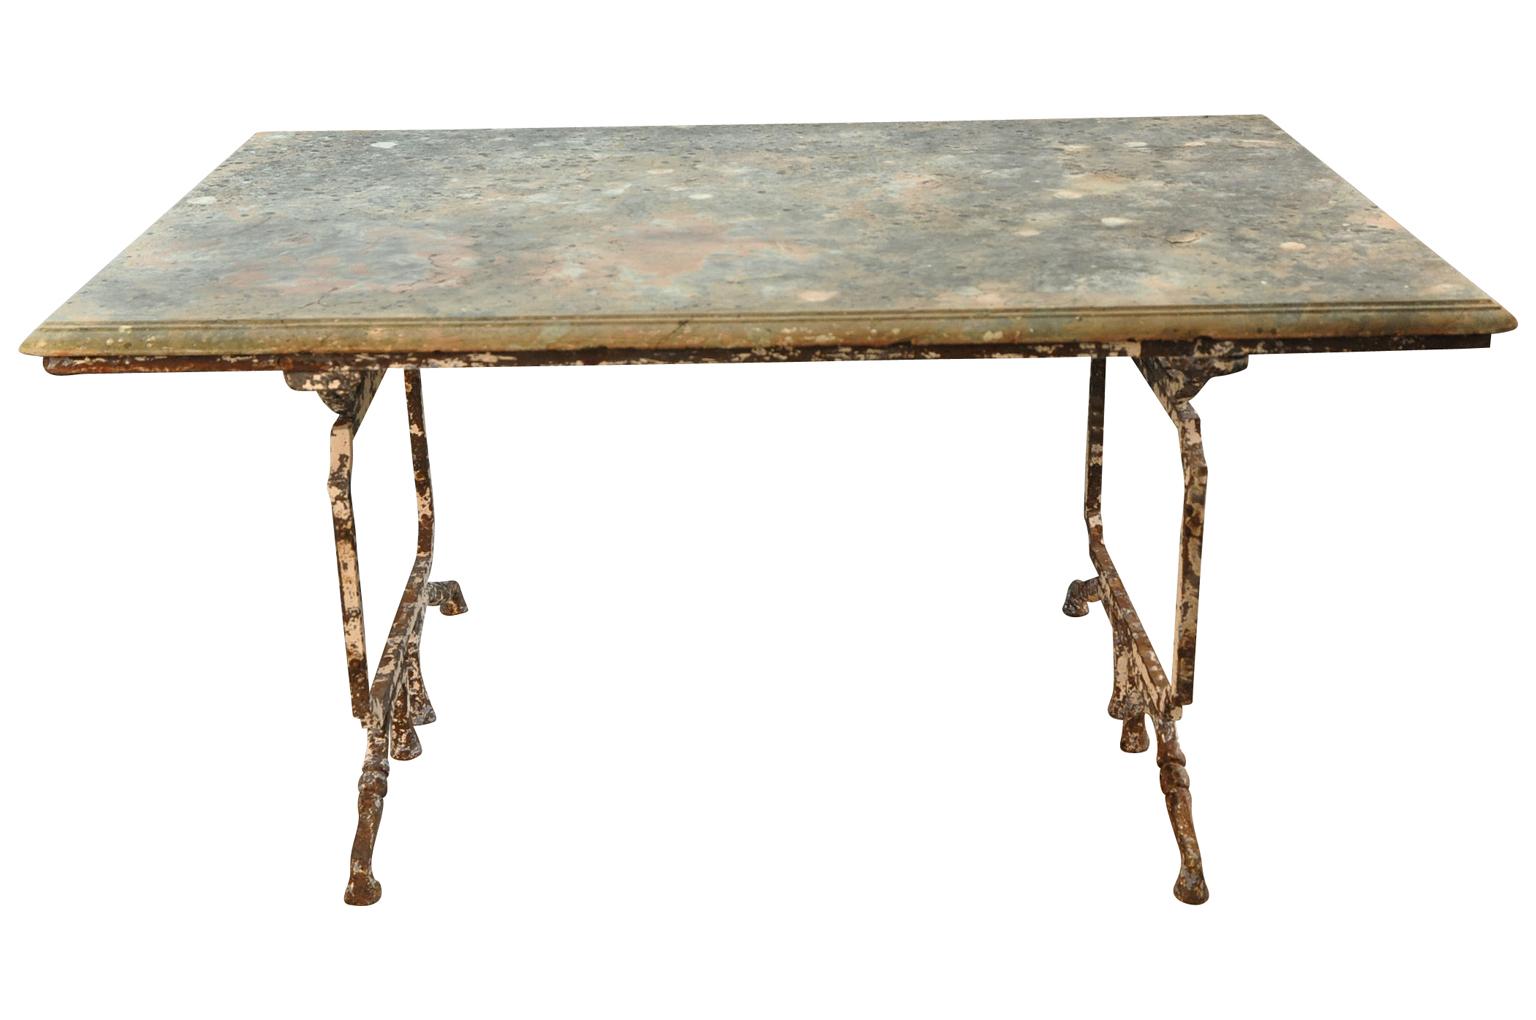 An outstanding later 19th century garden dining table from the Provence region of France. Beautifully constructed with a painted iron base and its original Rouge Royal marble top. Wonderful edge finish and sensational patina. Perfect for any